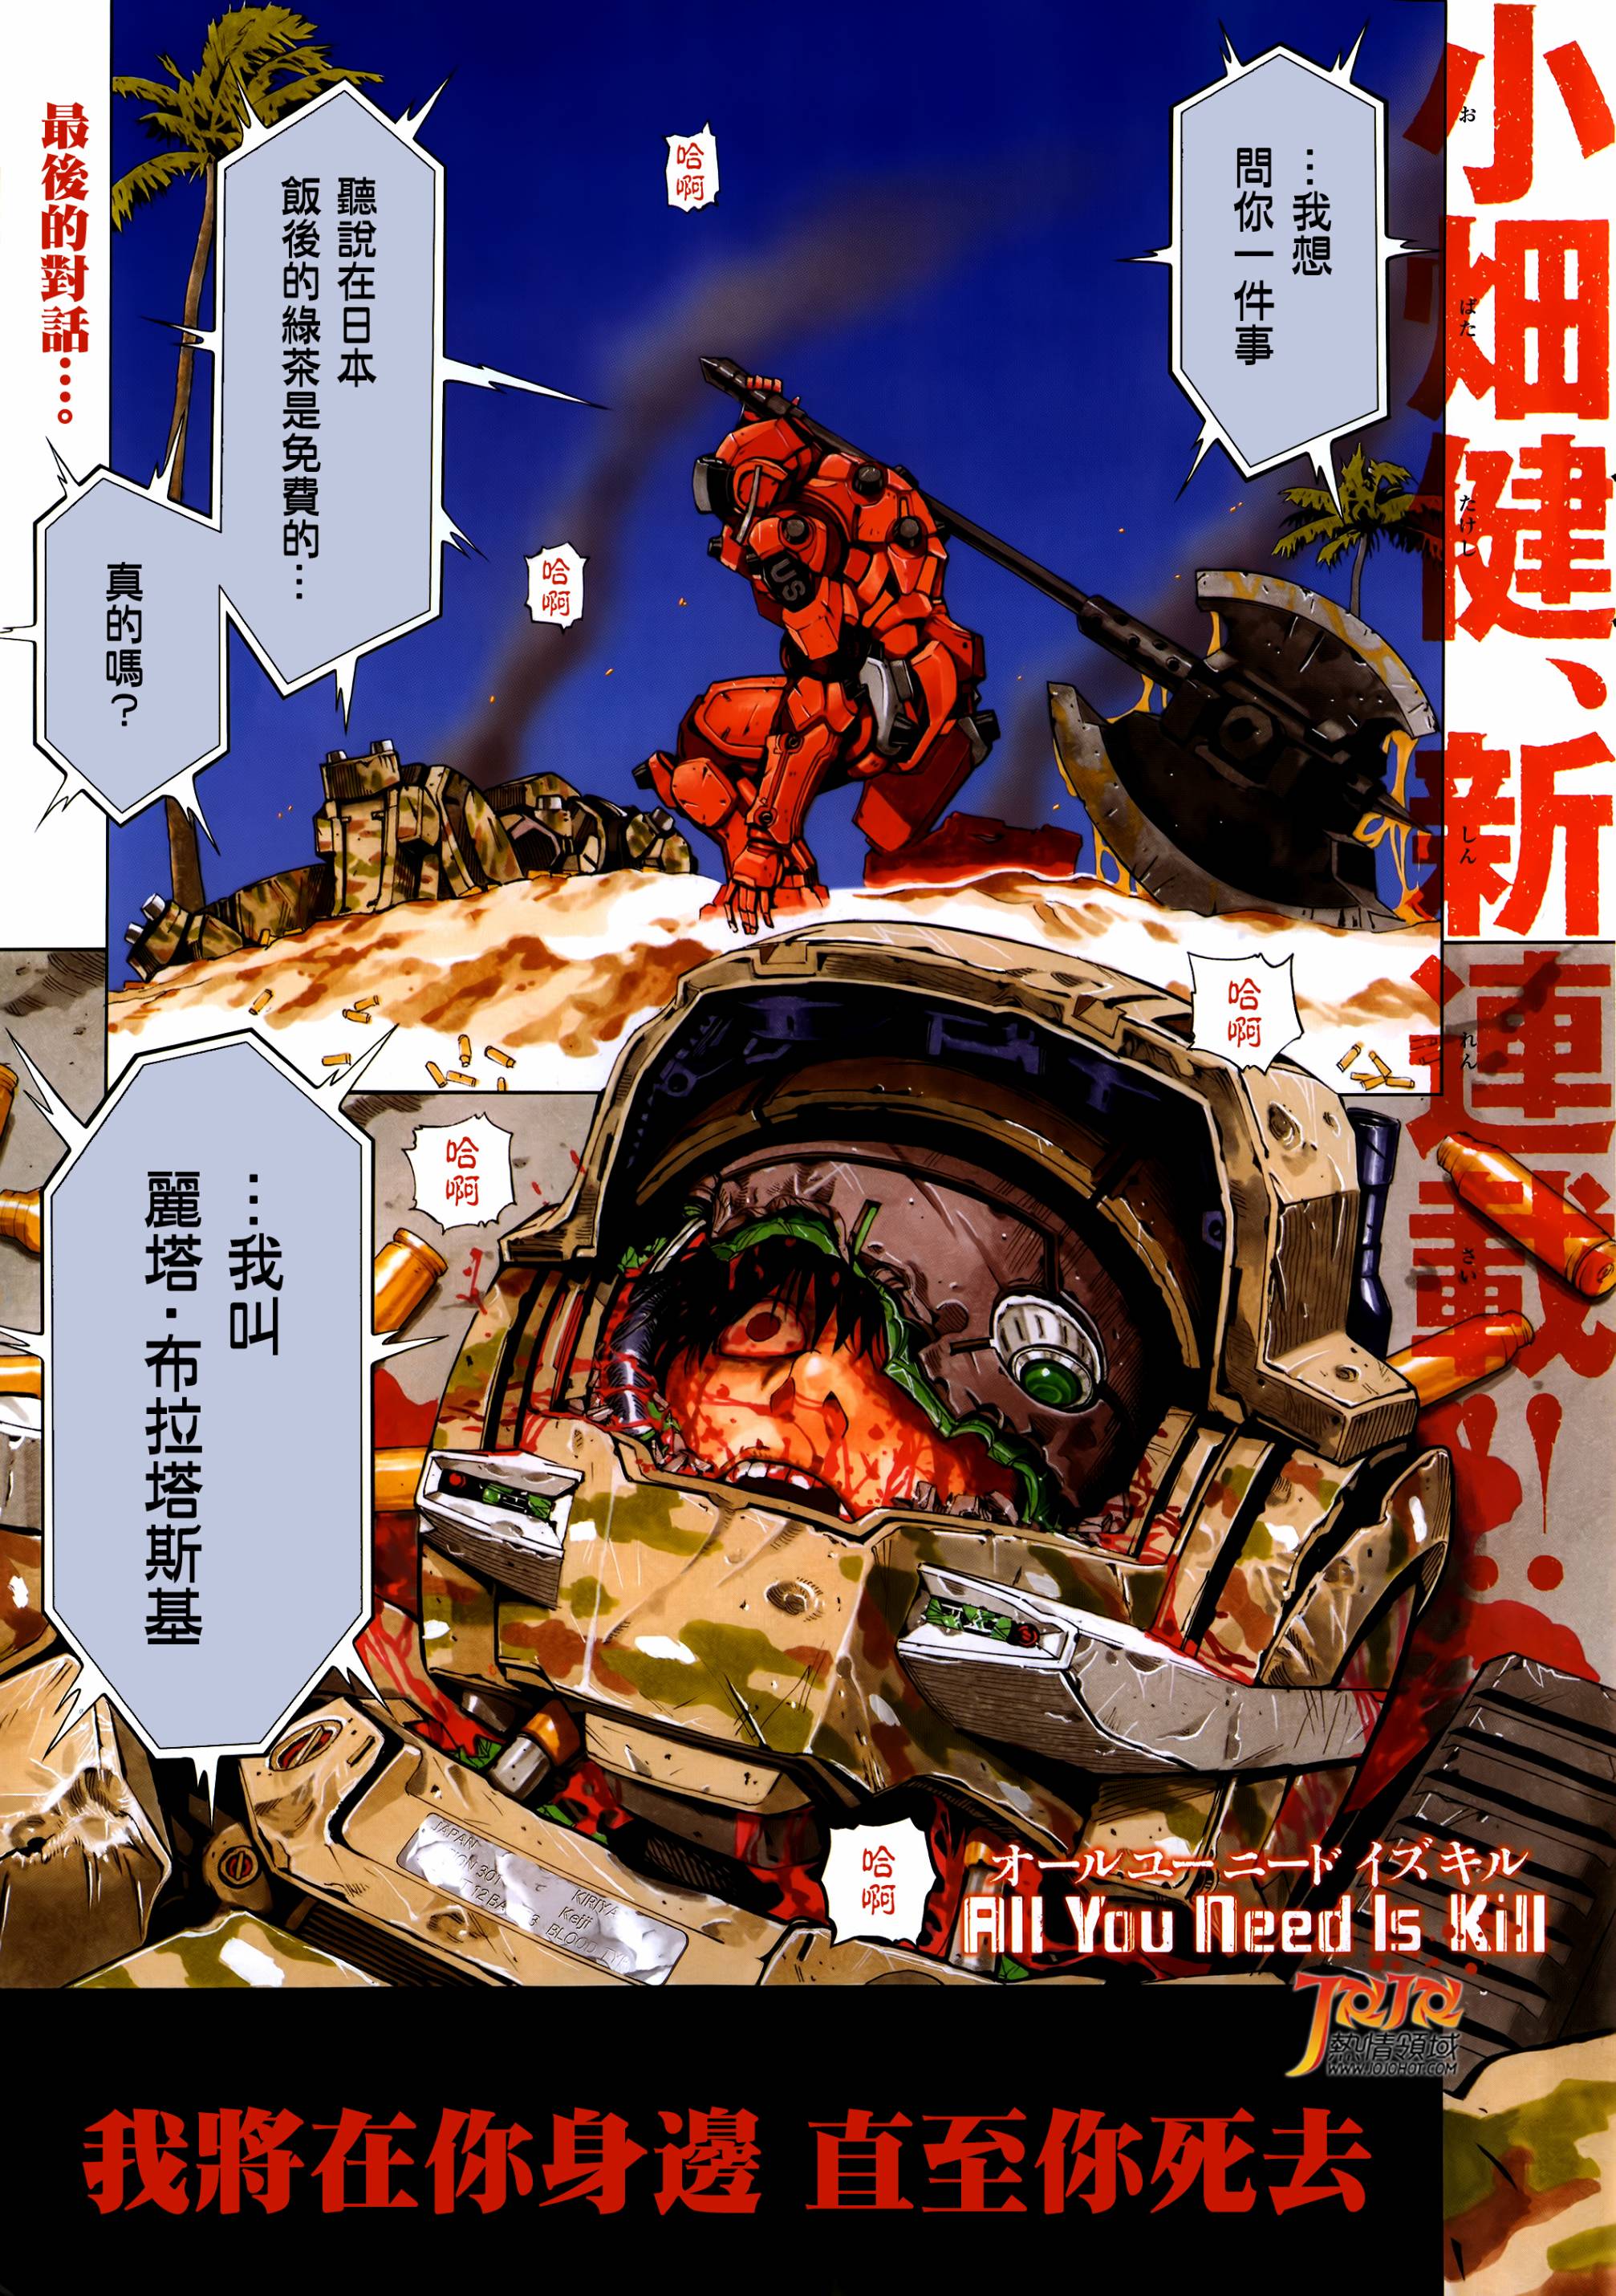 All You Need Is Kill - 第01話(1/2) - 1